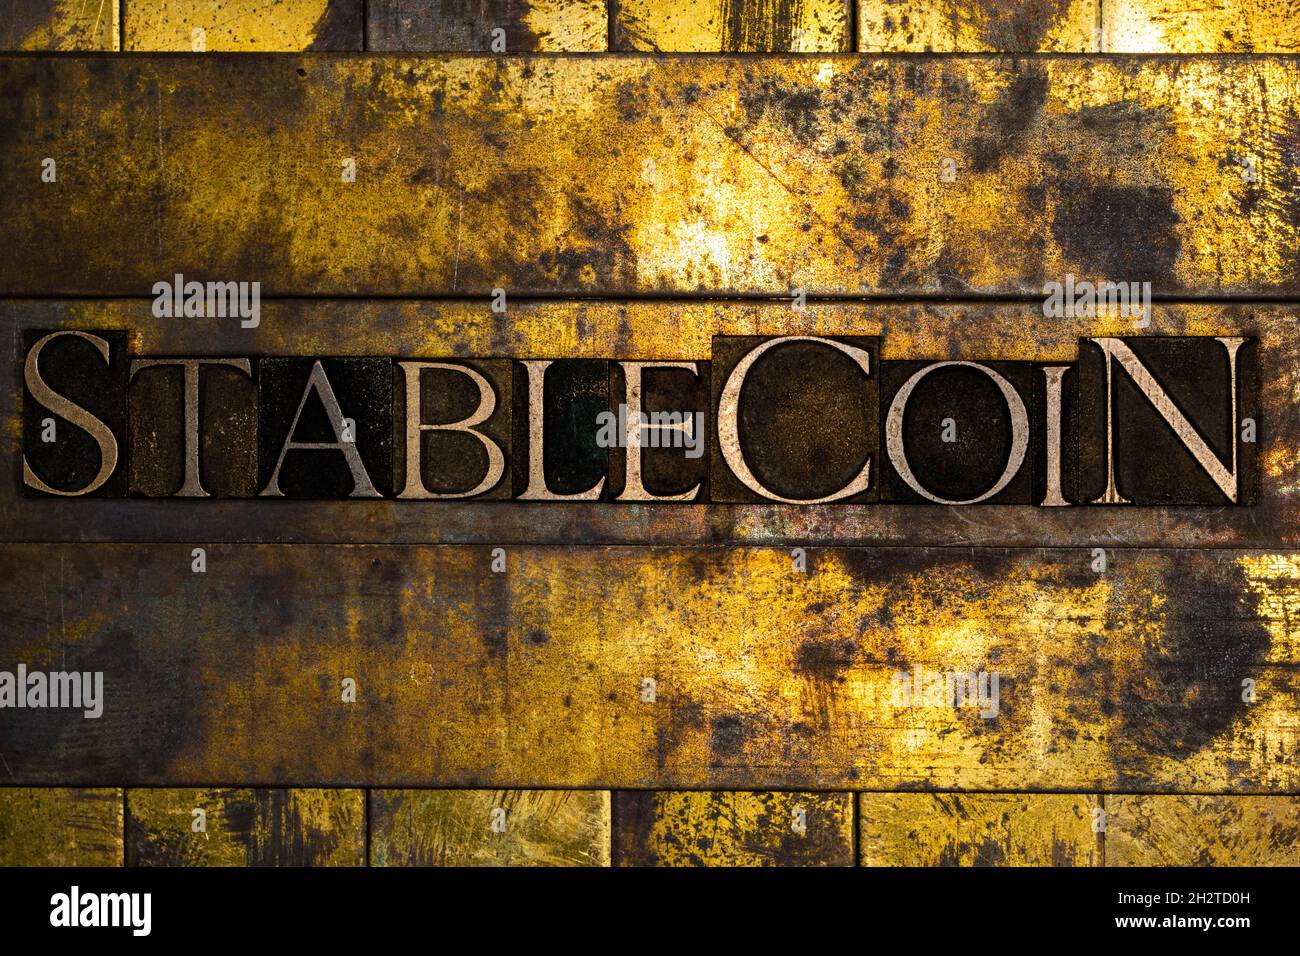 Stablecoin text message on textured grunge copper and vintage gold background Stock Photo